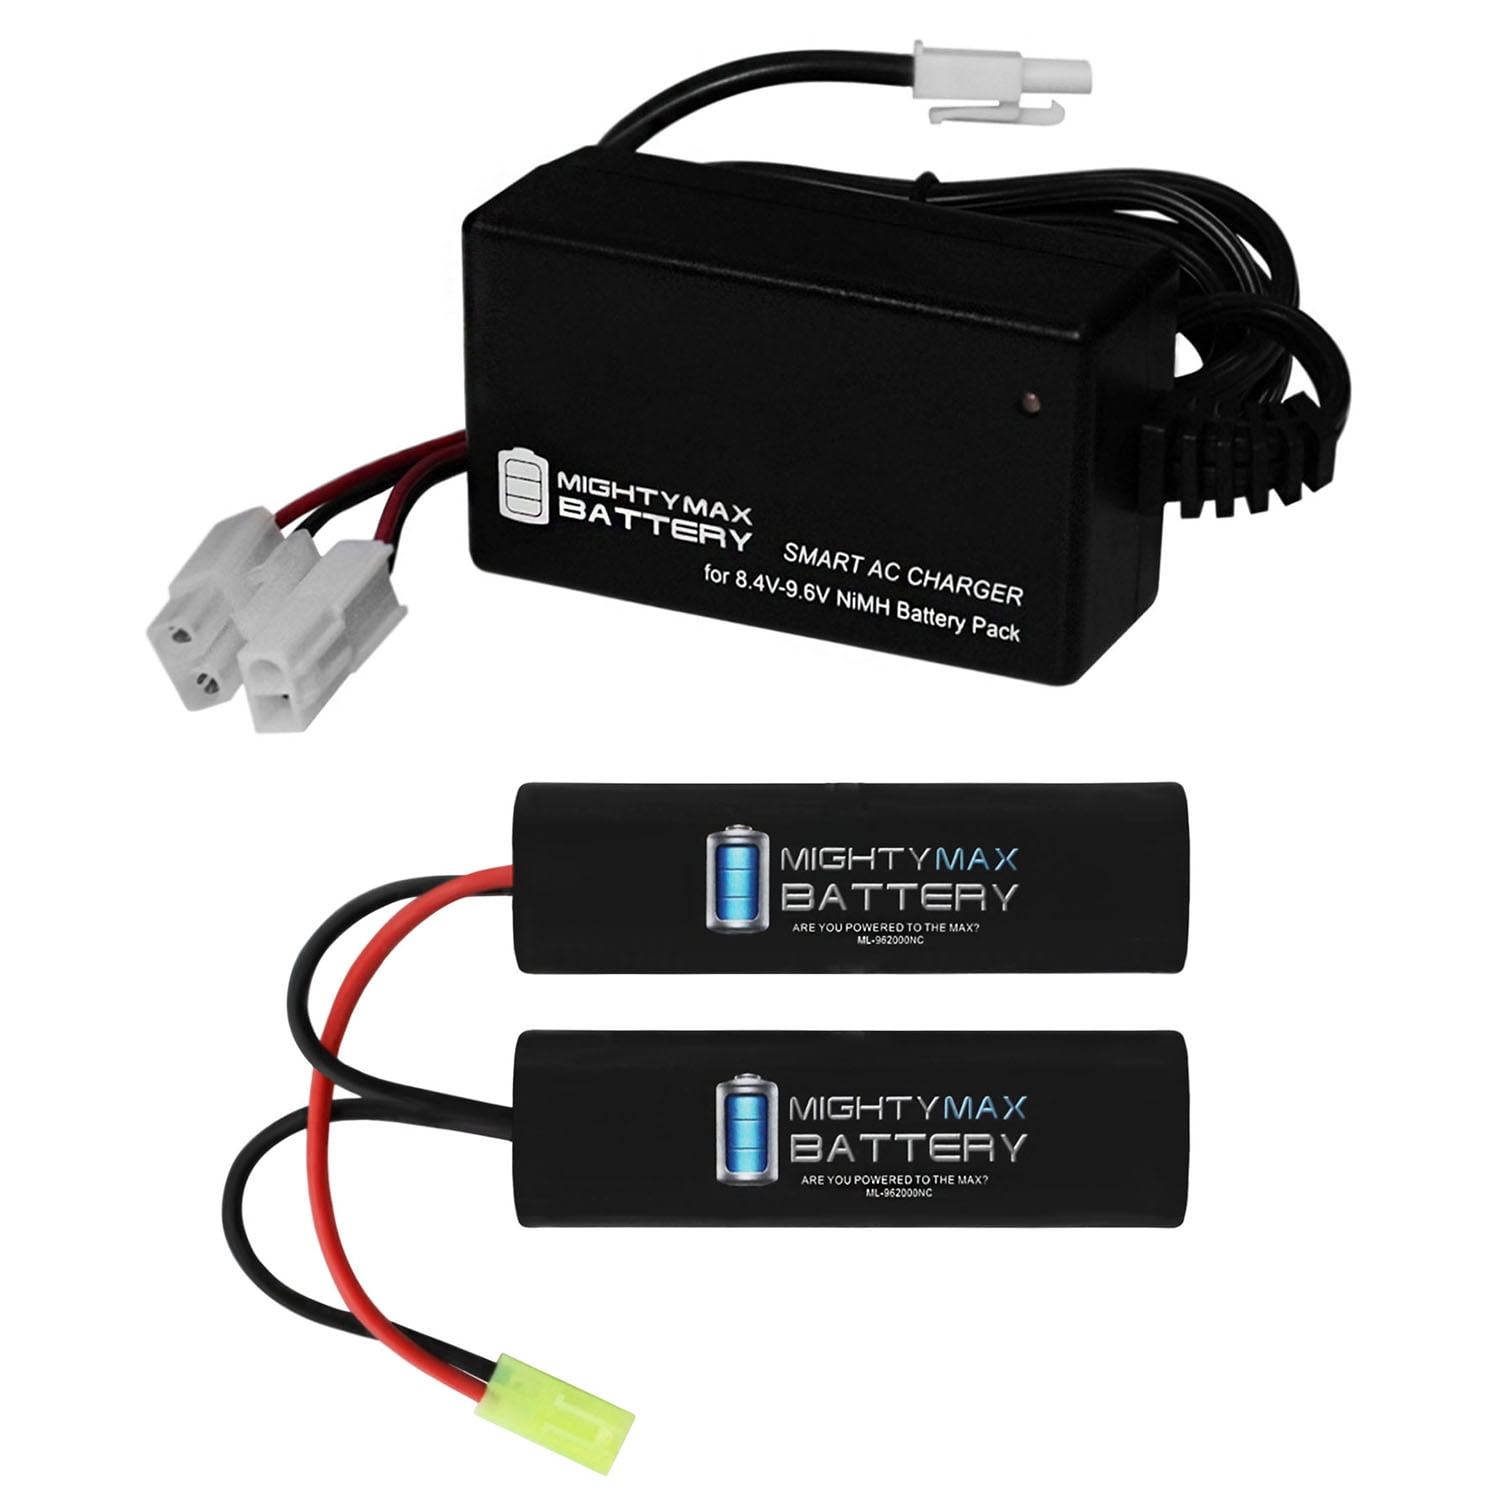 stopverf Koor kasteel 9.6V 2000mAh Replaces 400 FPS Airsoft DBoys M4 CQB-R Battery + Charger -  Walmart.com